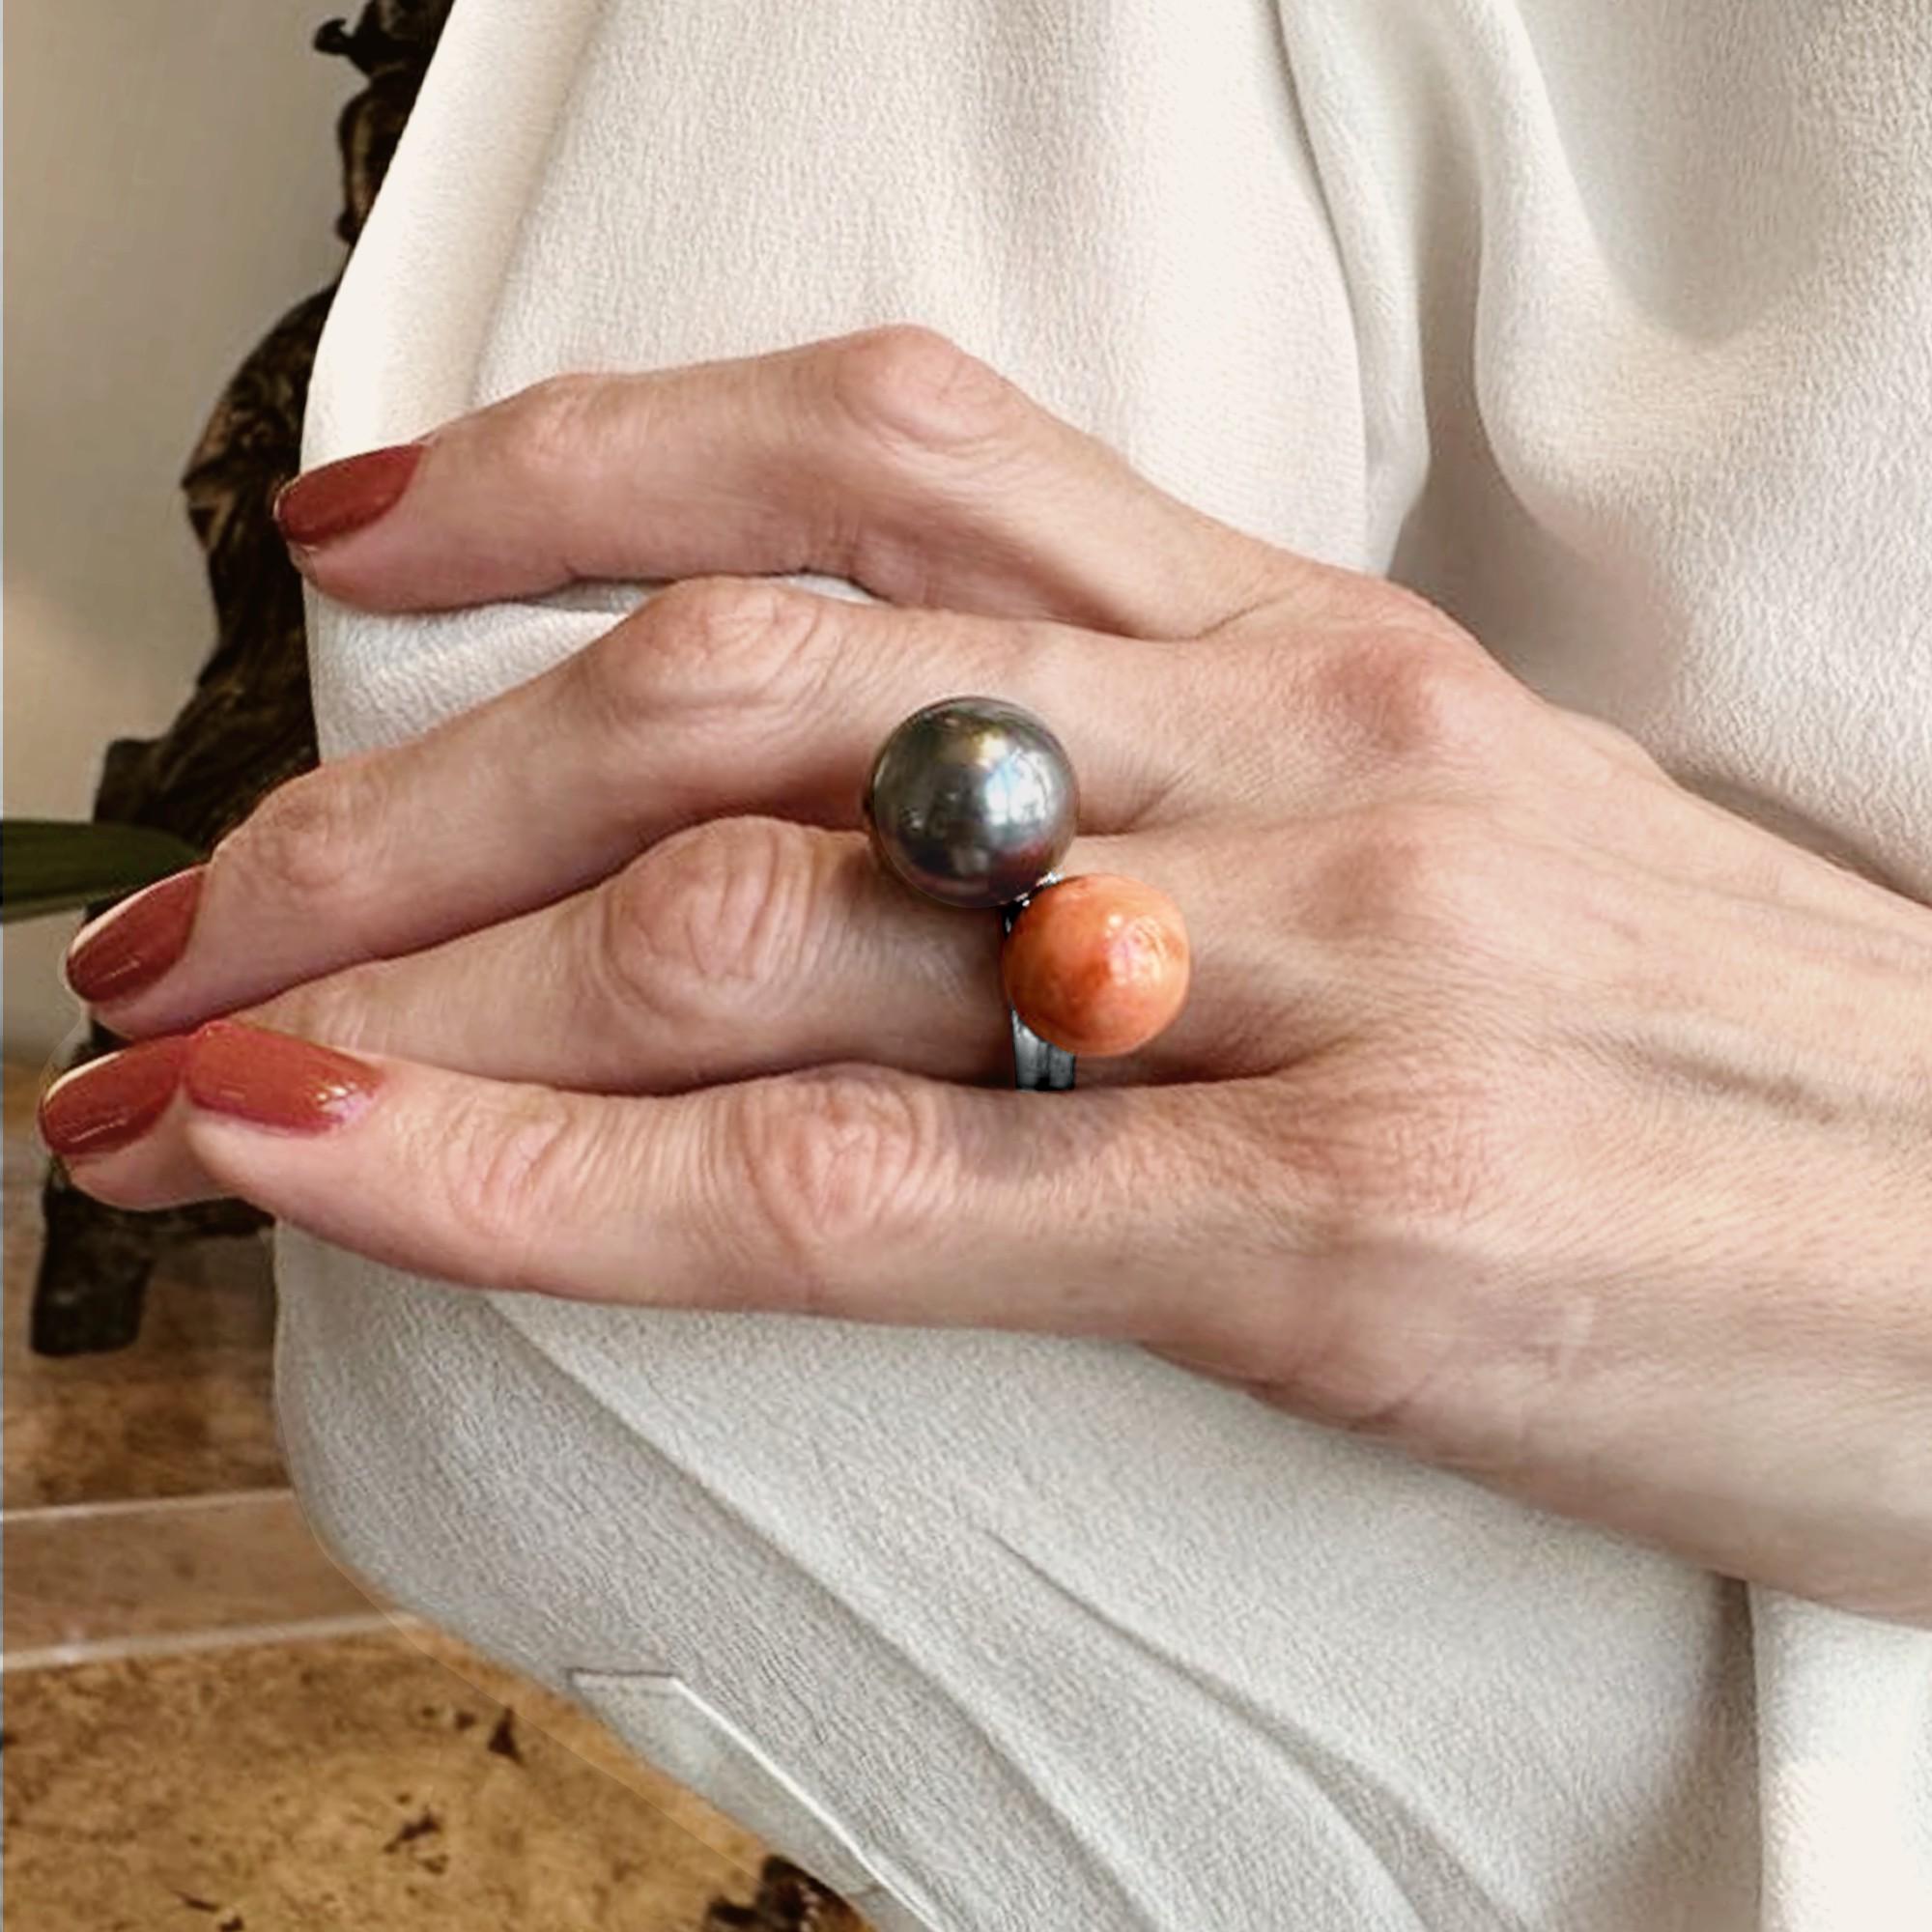 Alex Jona design collection, hand crafted in Italy, 18 carat white gold band ring set with one spherical Mediterranean Coral  12.00 mm diameter and one 14.20 mm Tahiti grey. Size 6.0 US, can be sized.
Alex Jona jewels stand out, not only for their